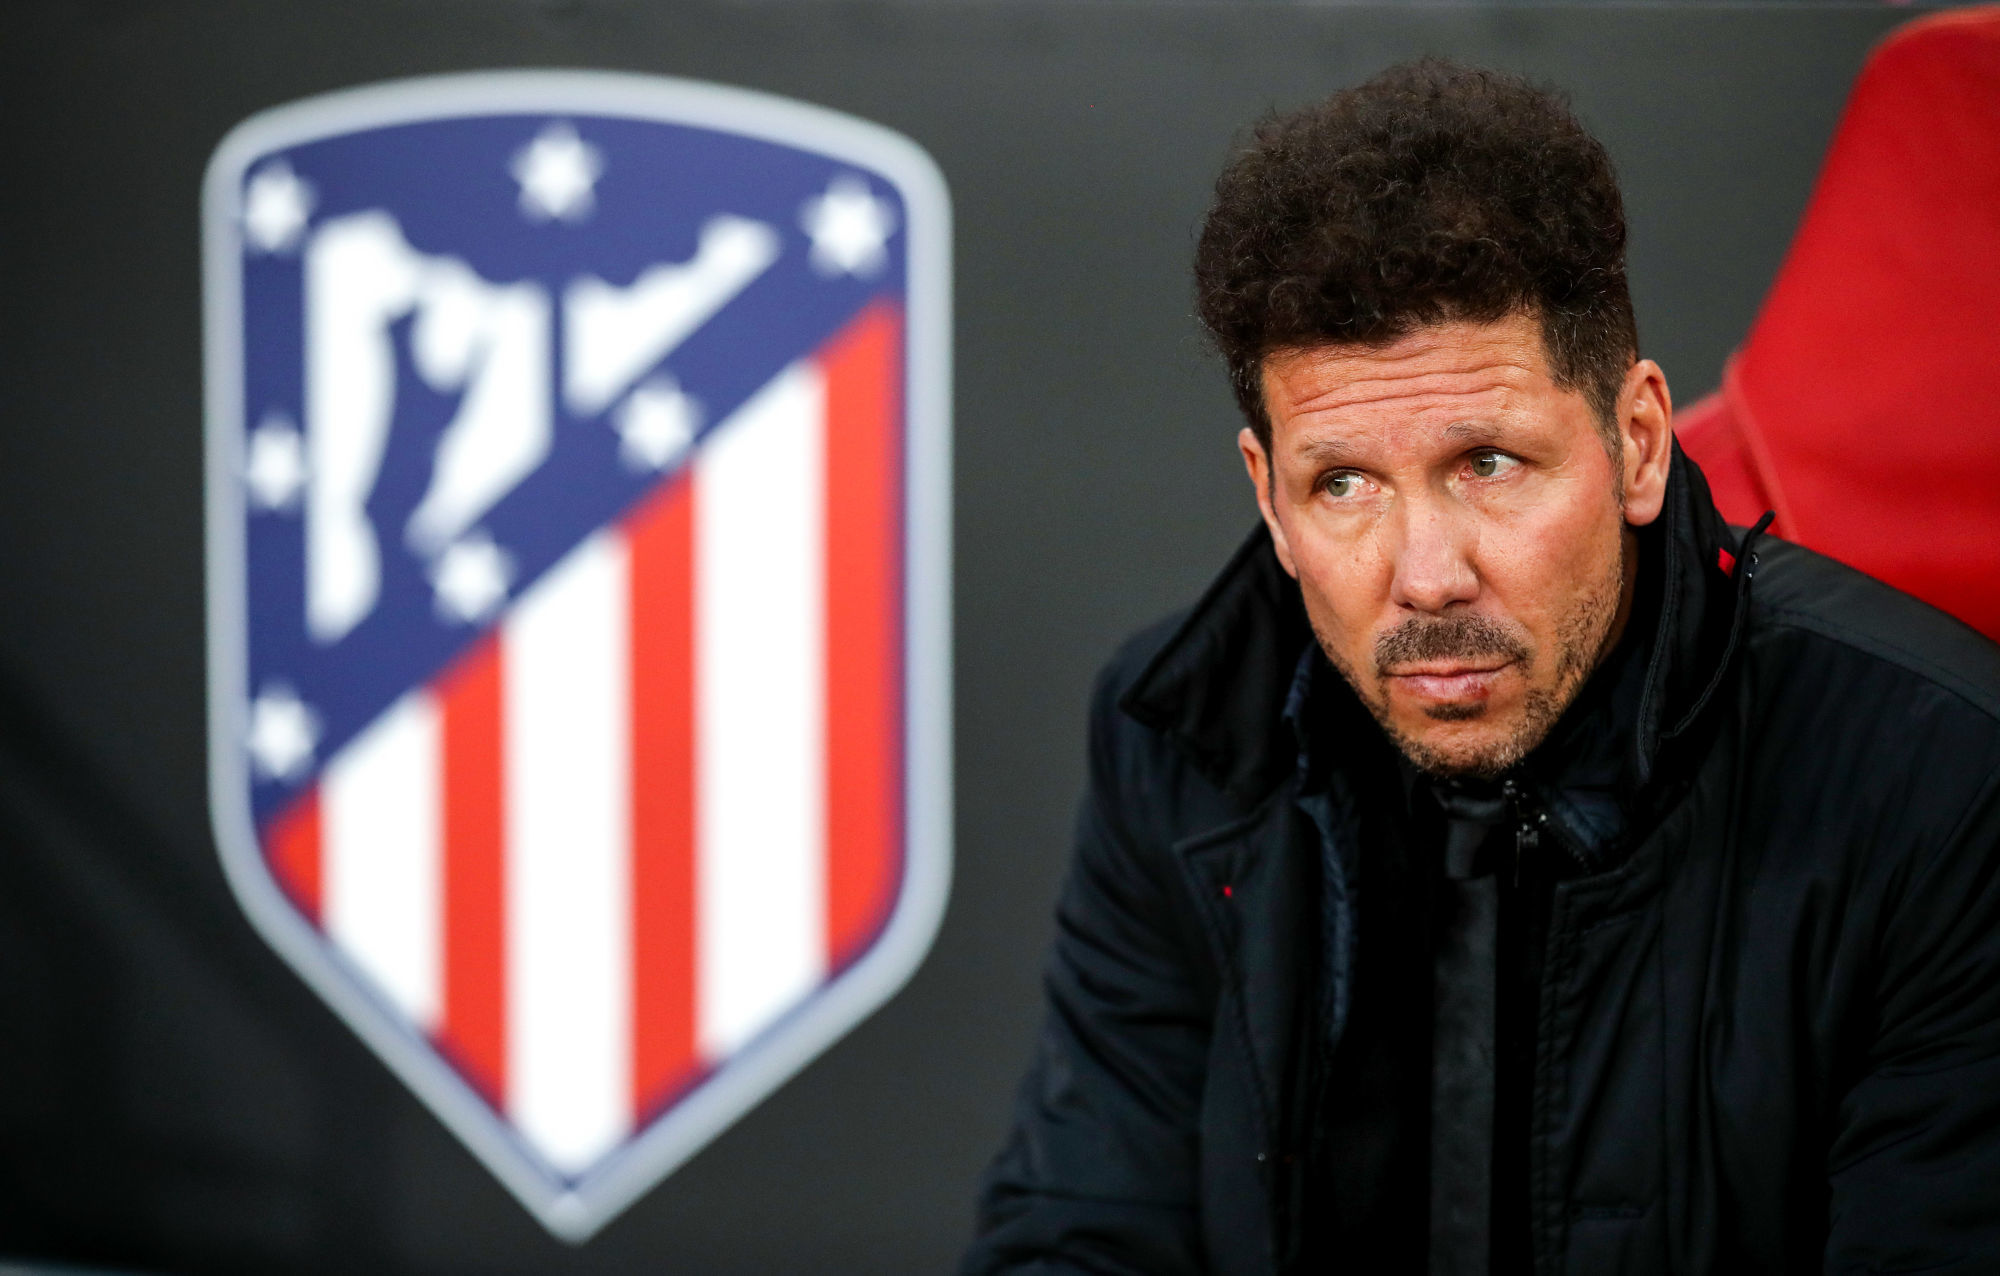 Atletico Madrid manager Diego Simeone during the UEFA Europa League semi final match between Arsenal and Atletico Madrid, first leg match at the Emirates Stadium, London, England on April 26th 2018. Photo : PA Images / Icon Sport